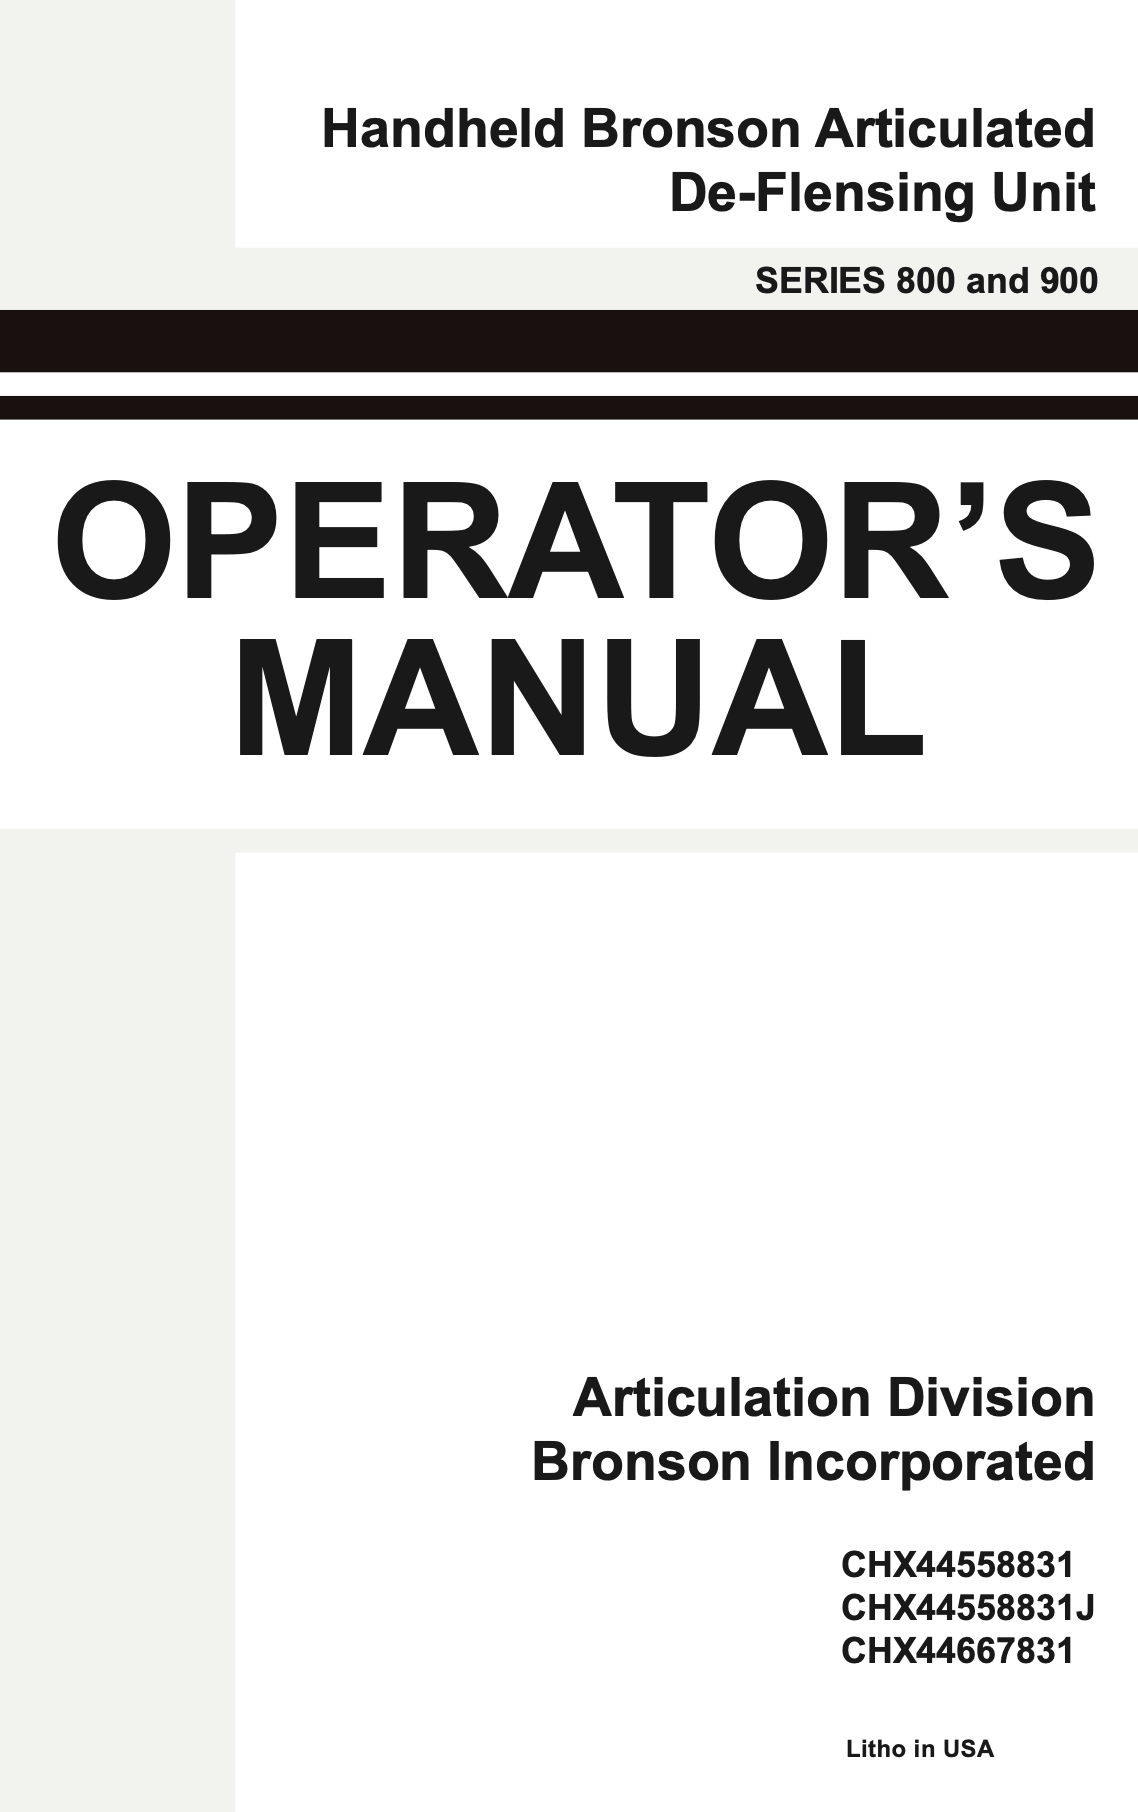 Operator's Manual for the Handheld Bronson Articulated De-Flensing Unit: A Game - Exalted Funeral